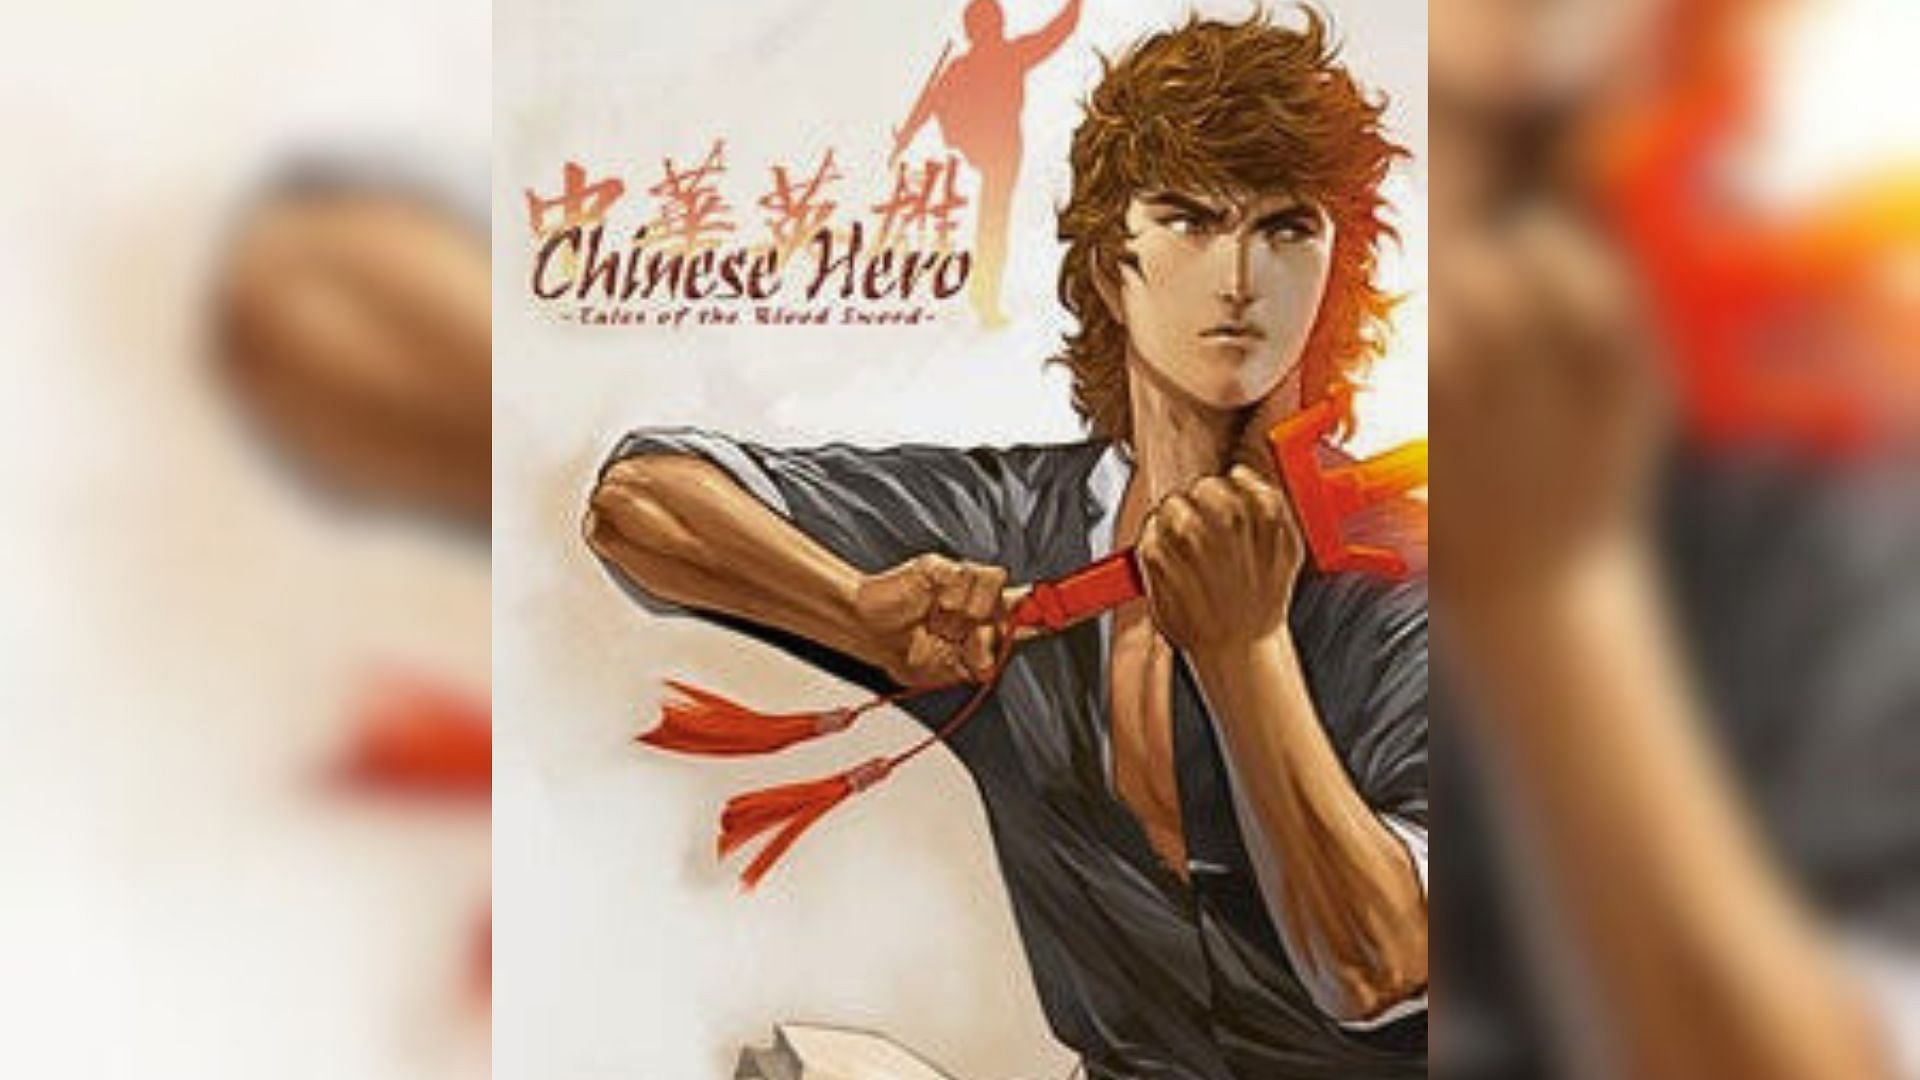 Cover of Chinese Hero (Image via Ma Wing Shing)